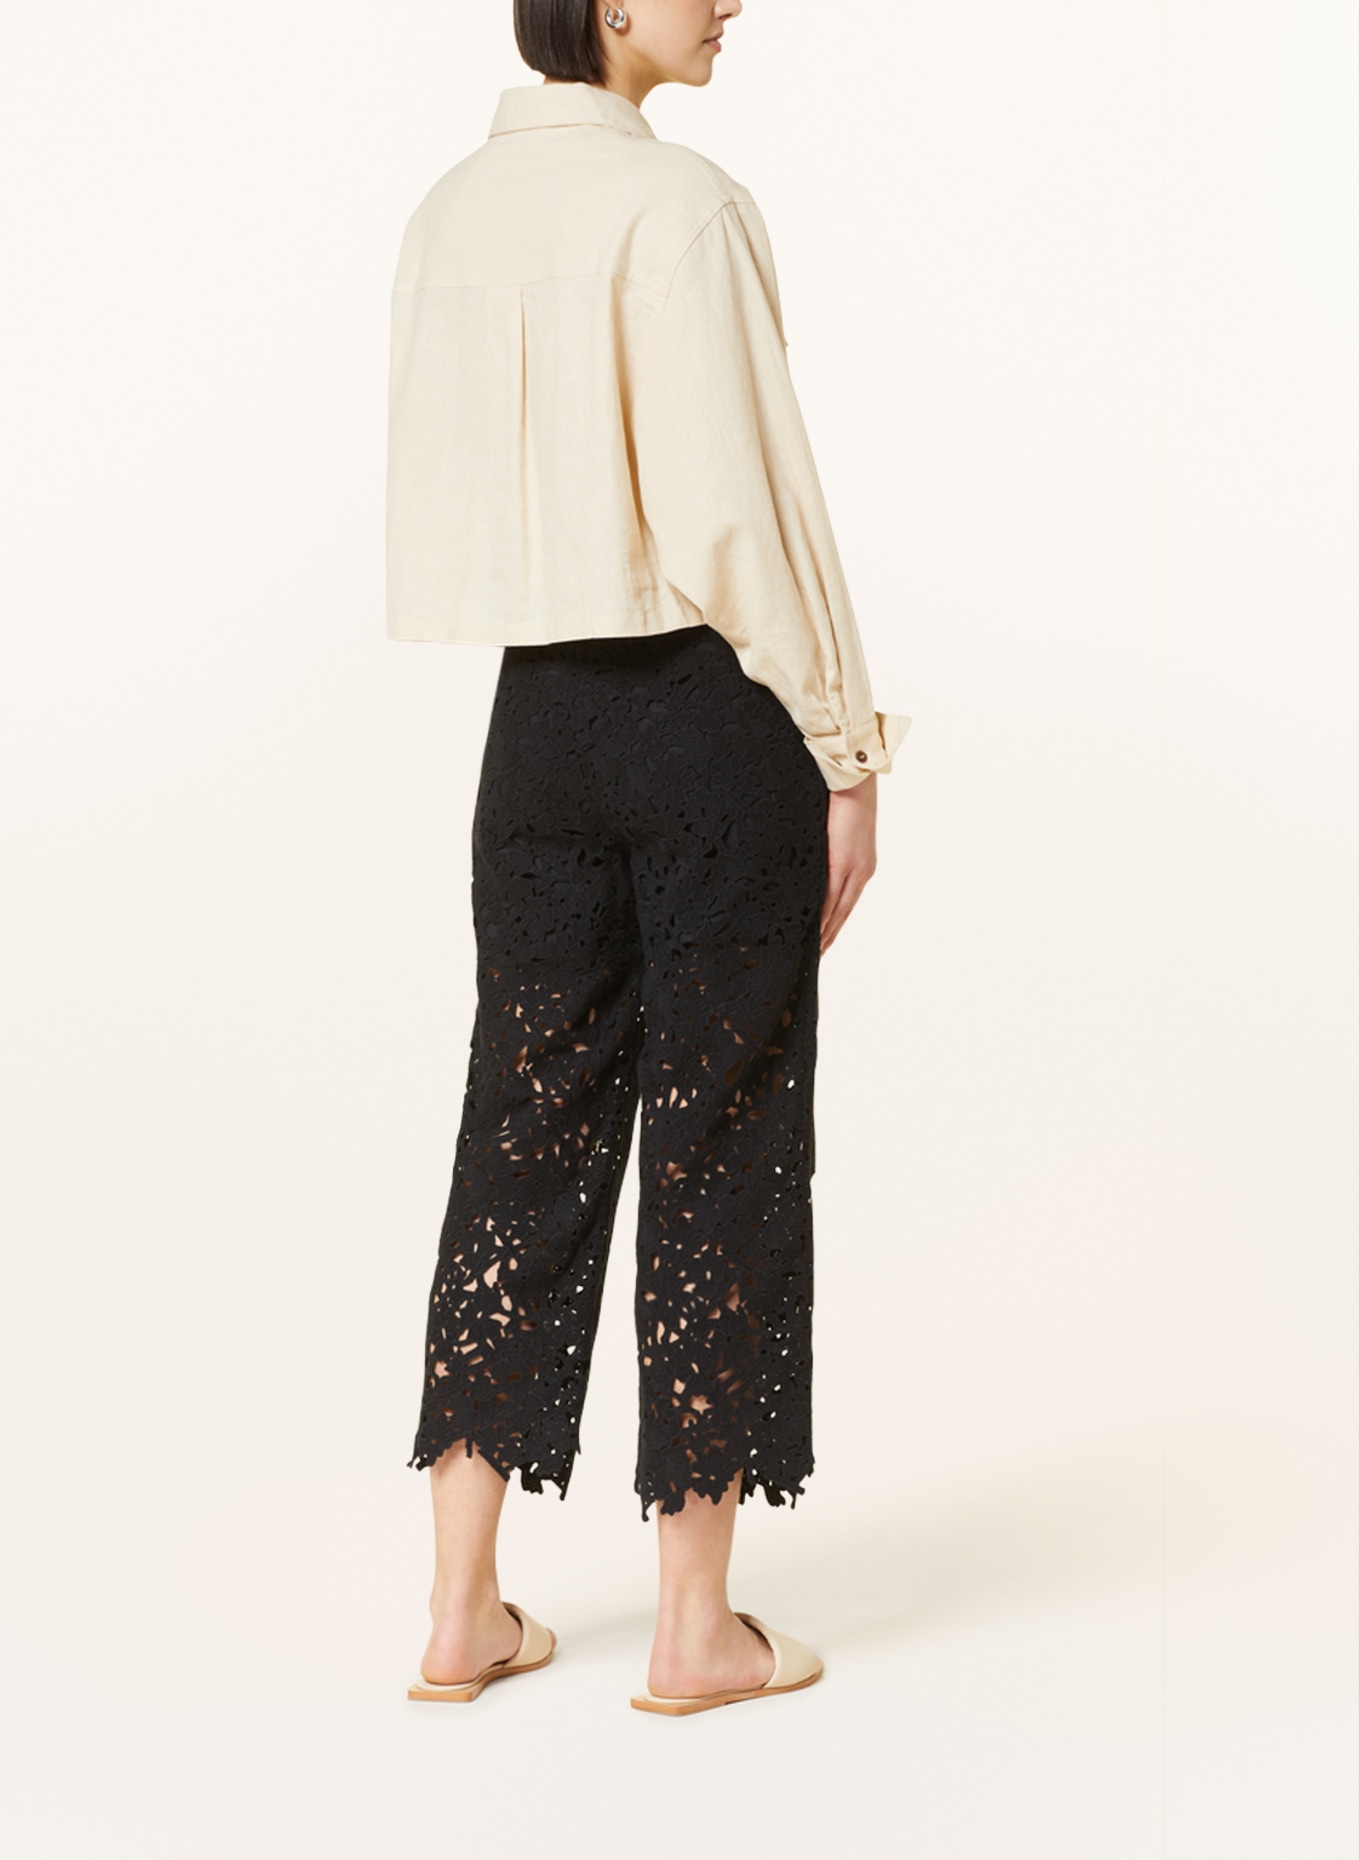 COS 7/8 trousers made of crochet lace, Color: BLACK (Image 3)